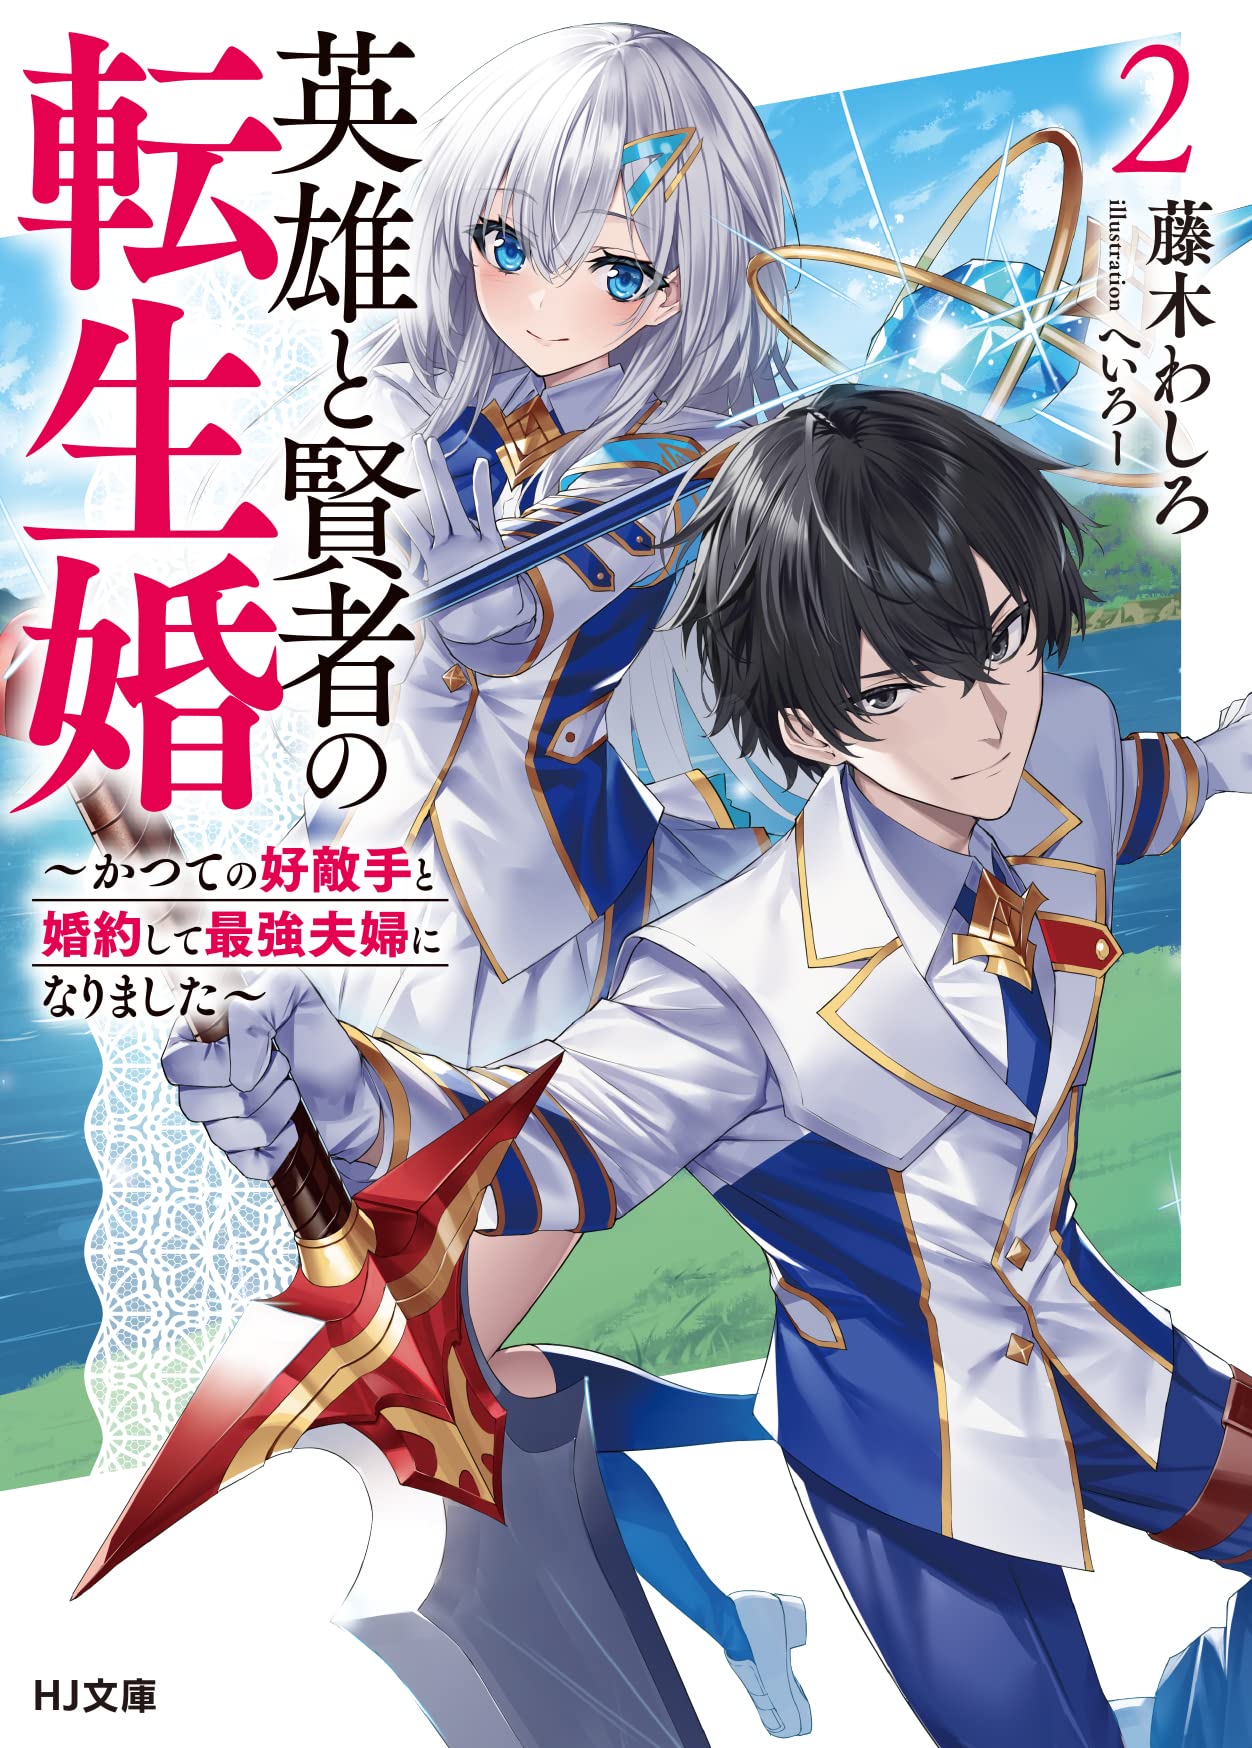 Read Reincarnated - The Hero Marries the Sage ~After Becoming Engaged to a  Former Rival, We Became the Strongest Couple~ - manga Online in English